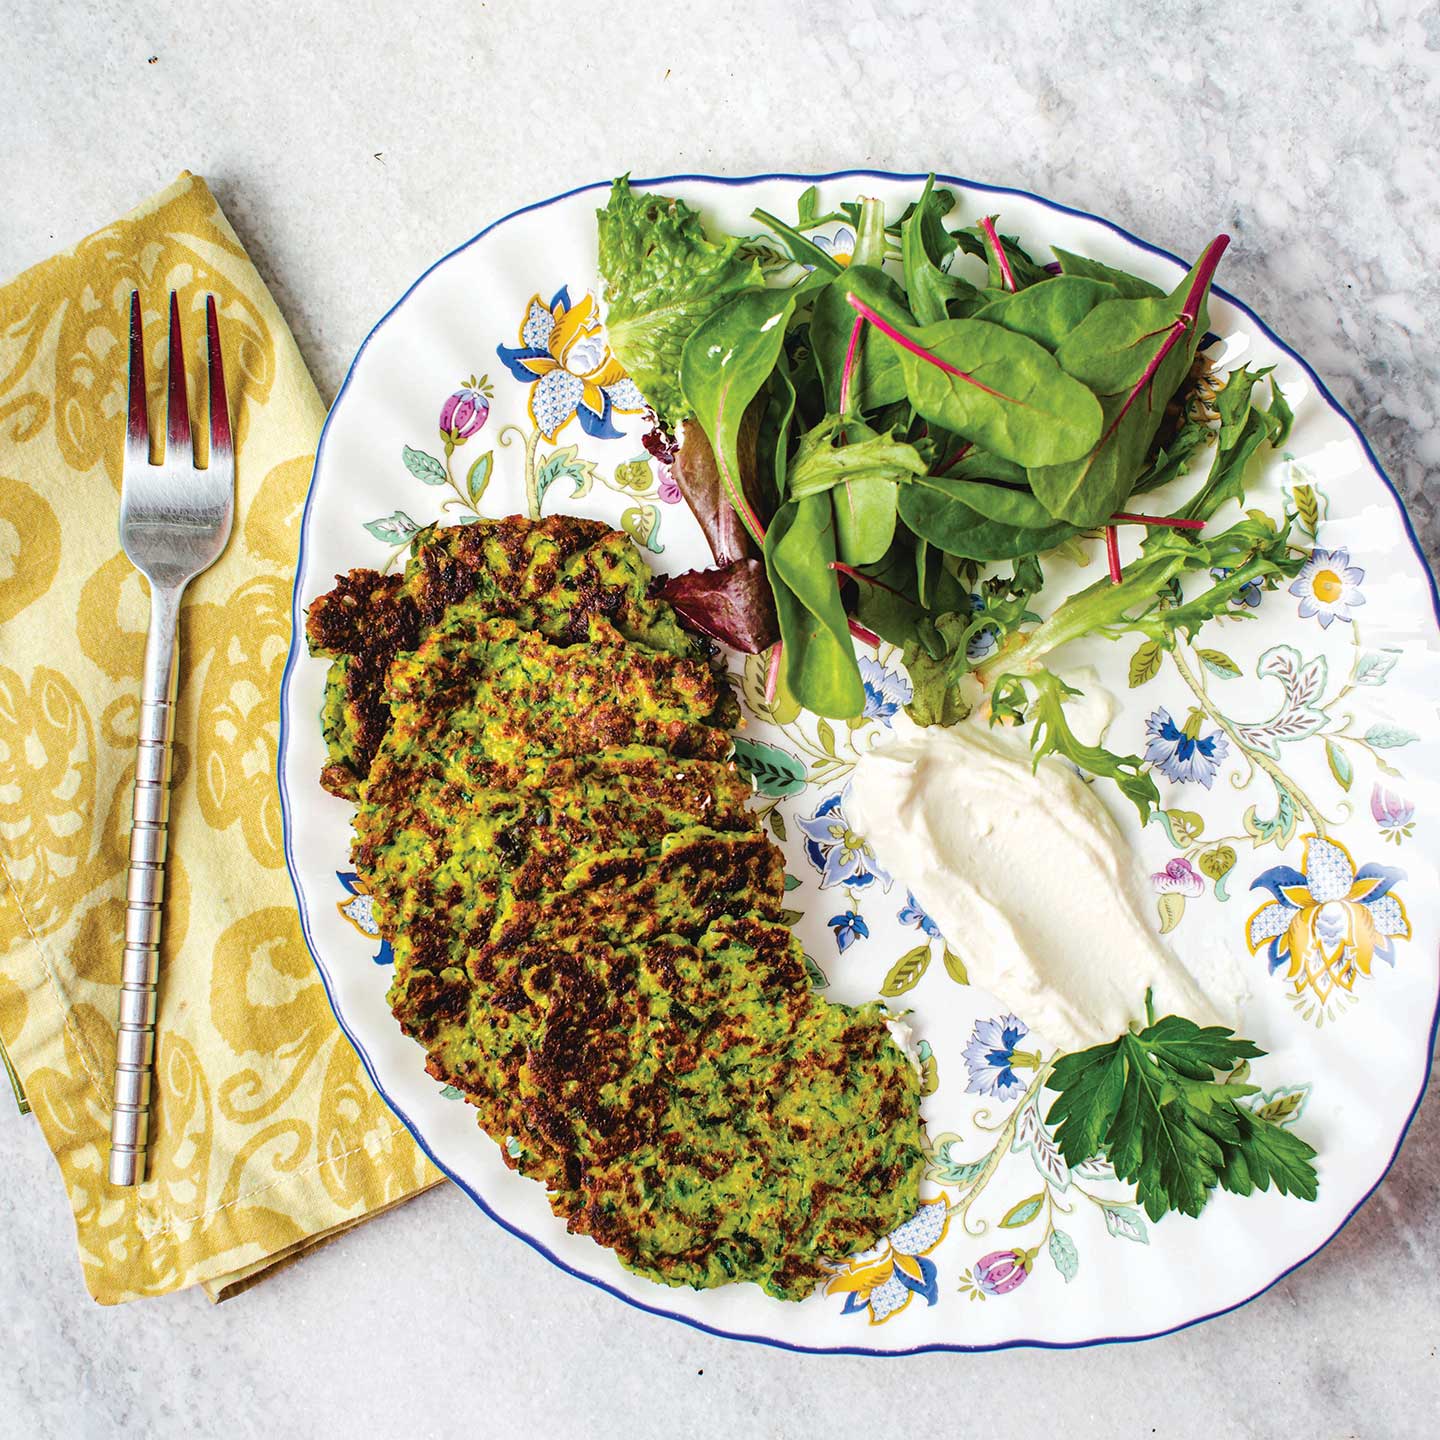 Hannah Wright’s Summertime Zucchini Fritters